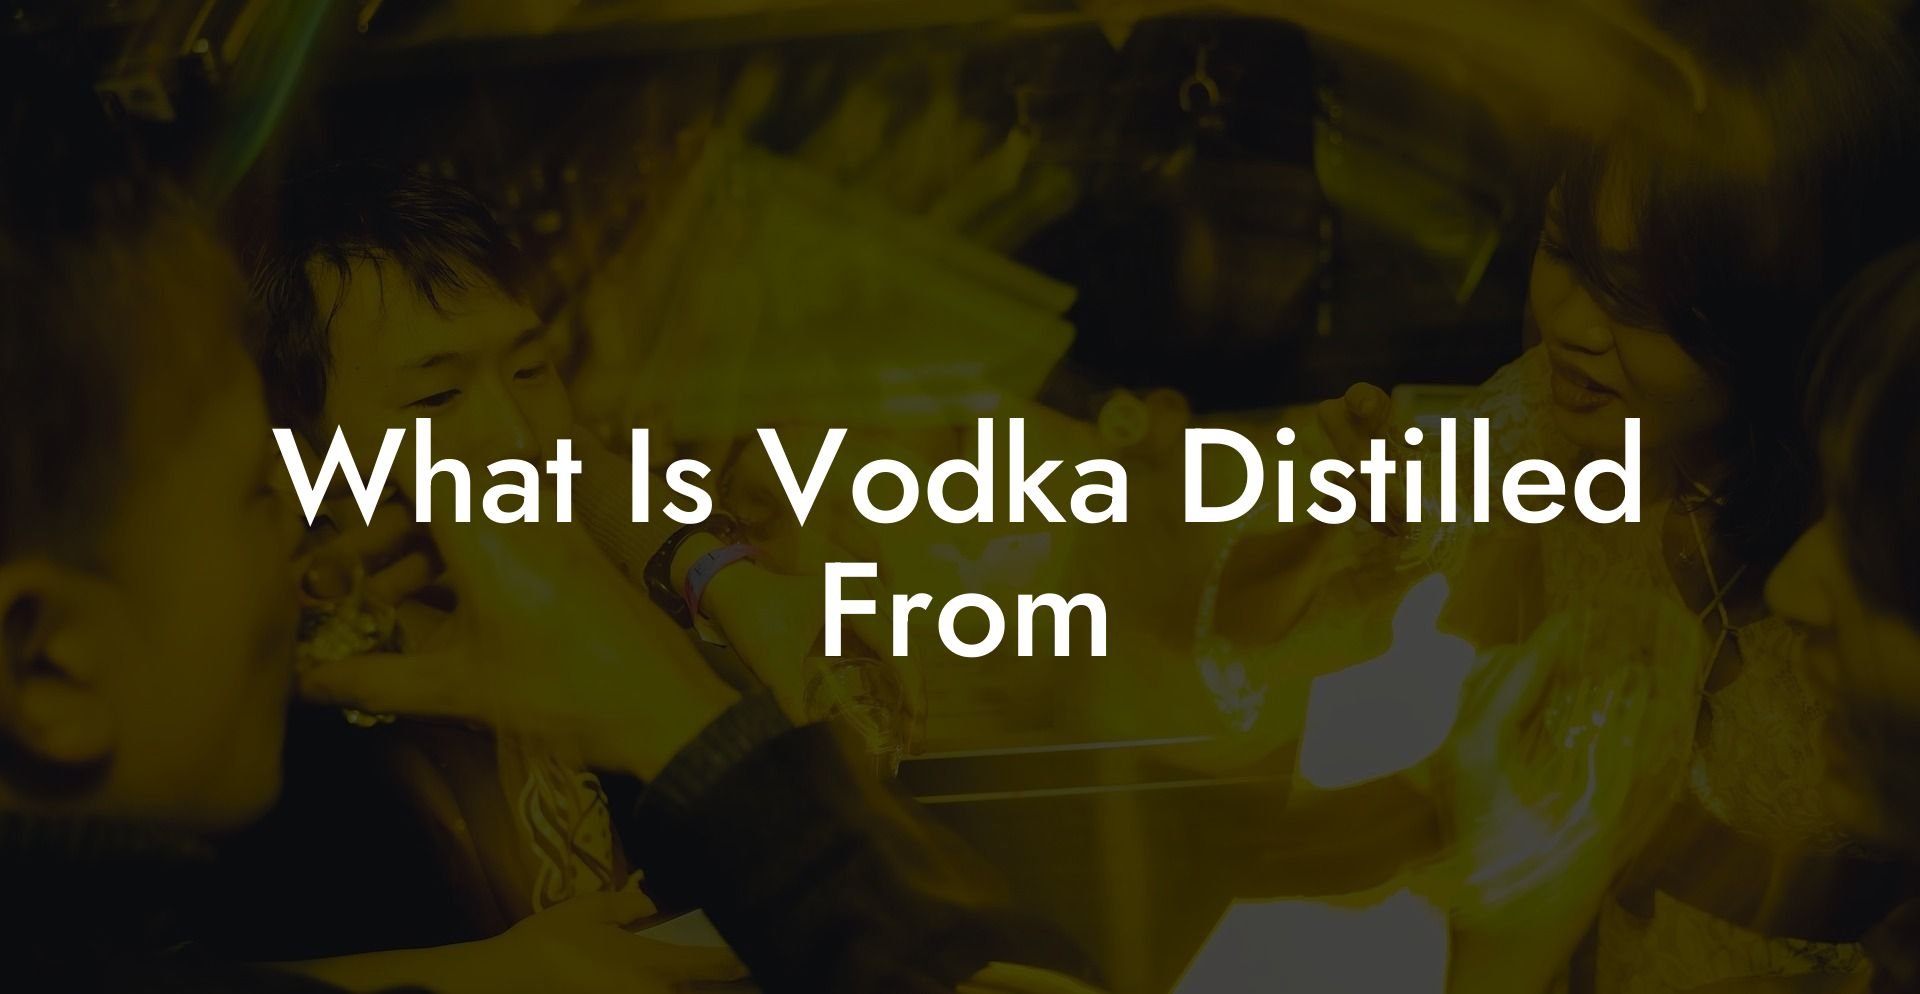 What Is Vodka Distilled From